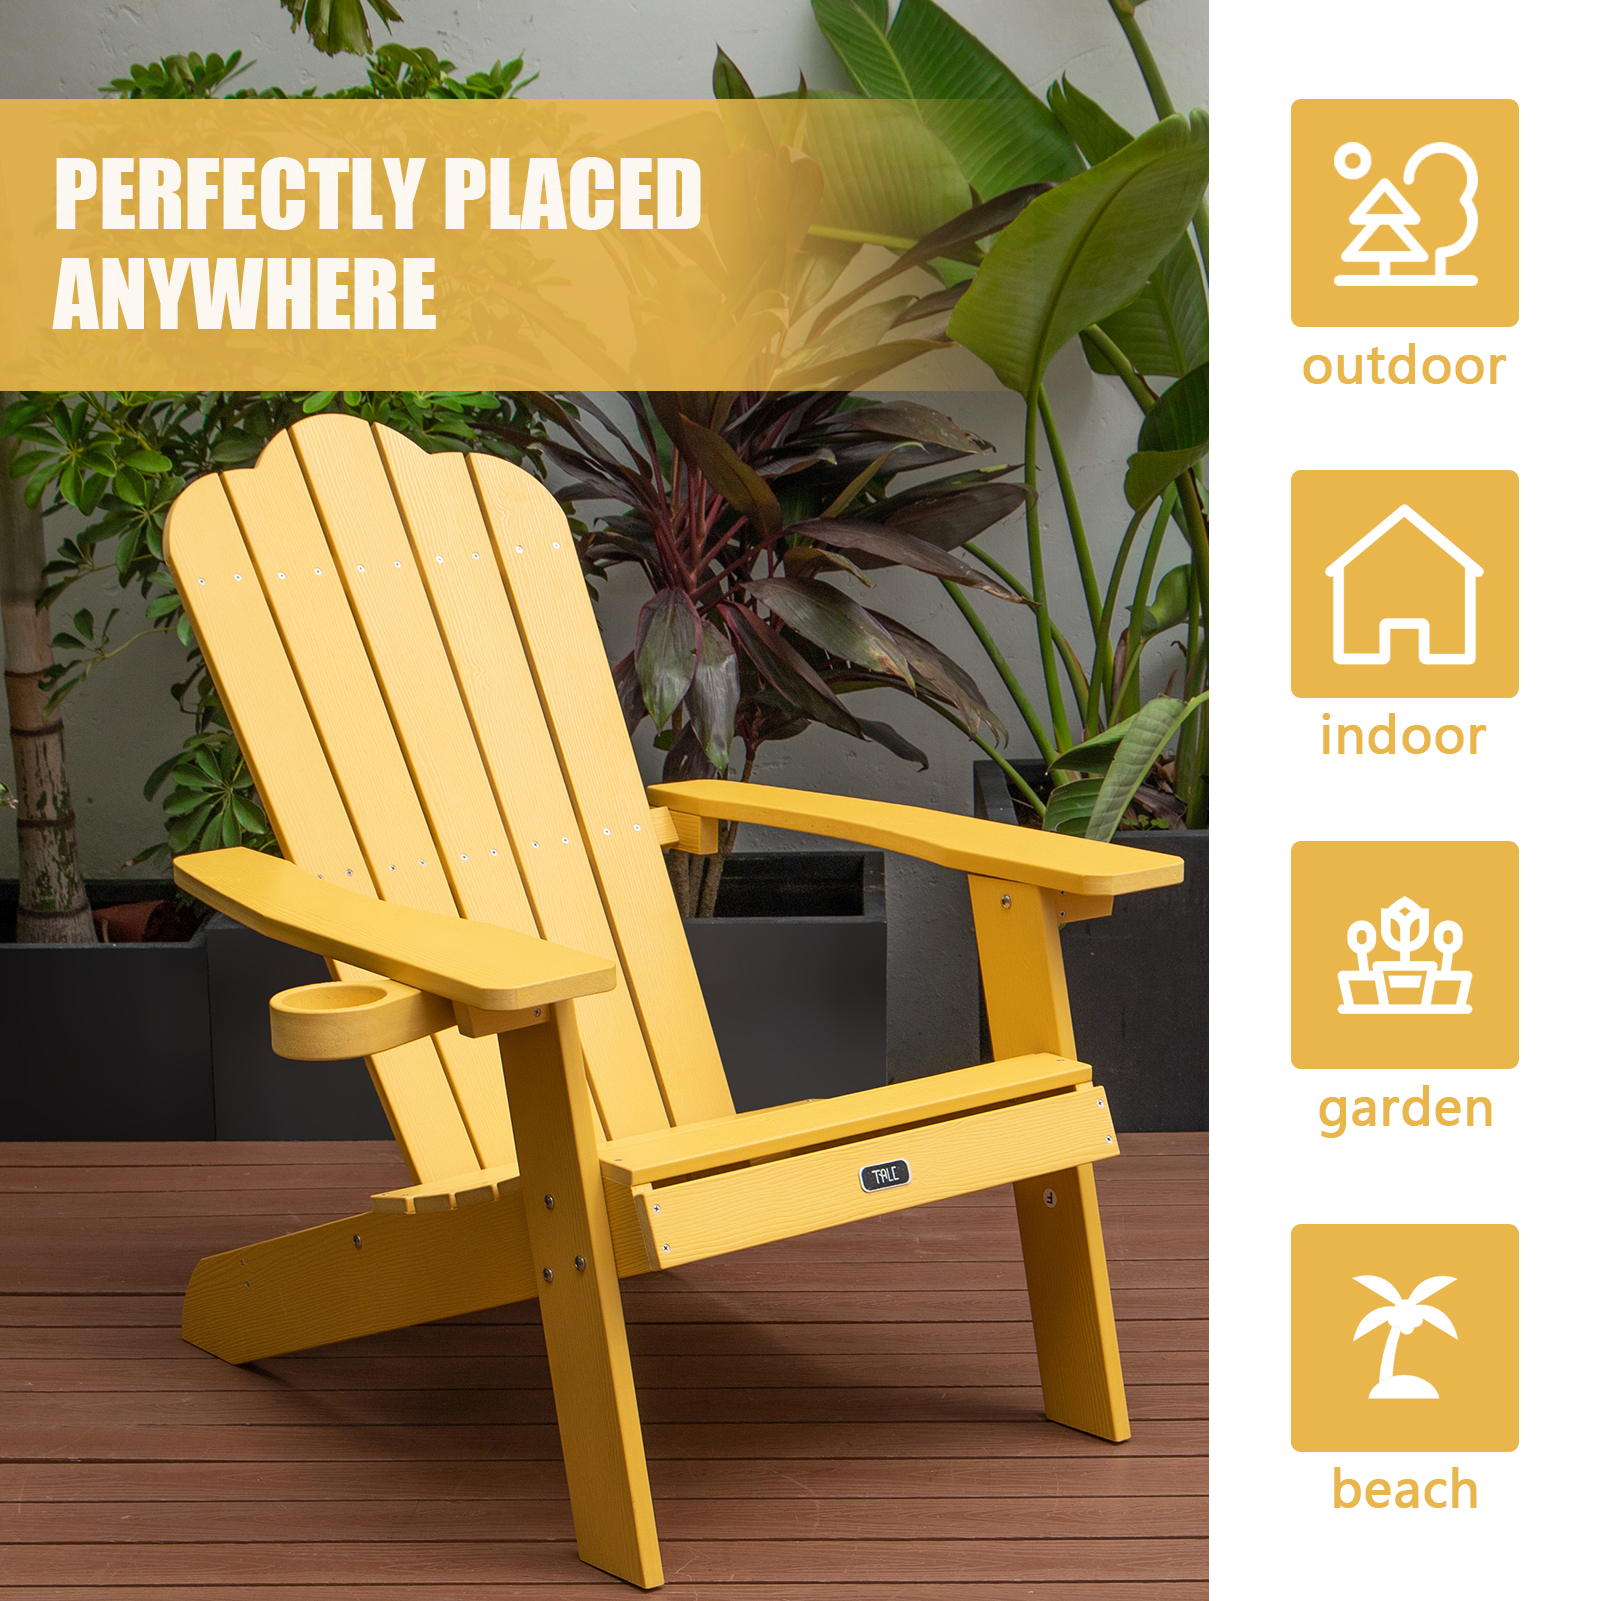 Adirondack Chair with Cup Holder, Patio Outdoor Chairs, Weather Resistant Lounge Chair, Fade-Resistant, Backyard Furniture Painted Chair, for Lawn Outdoor Patio Deck Garden Porch Lawn - image 5 of 7